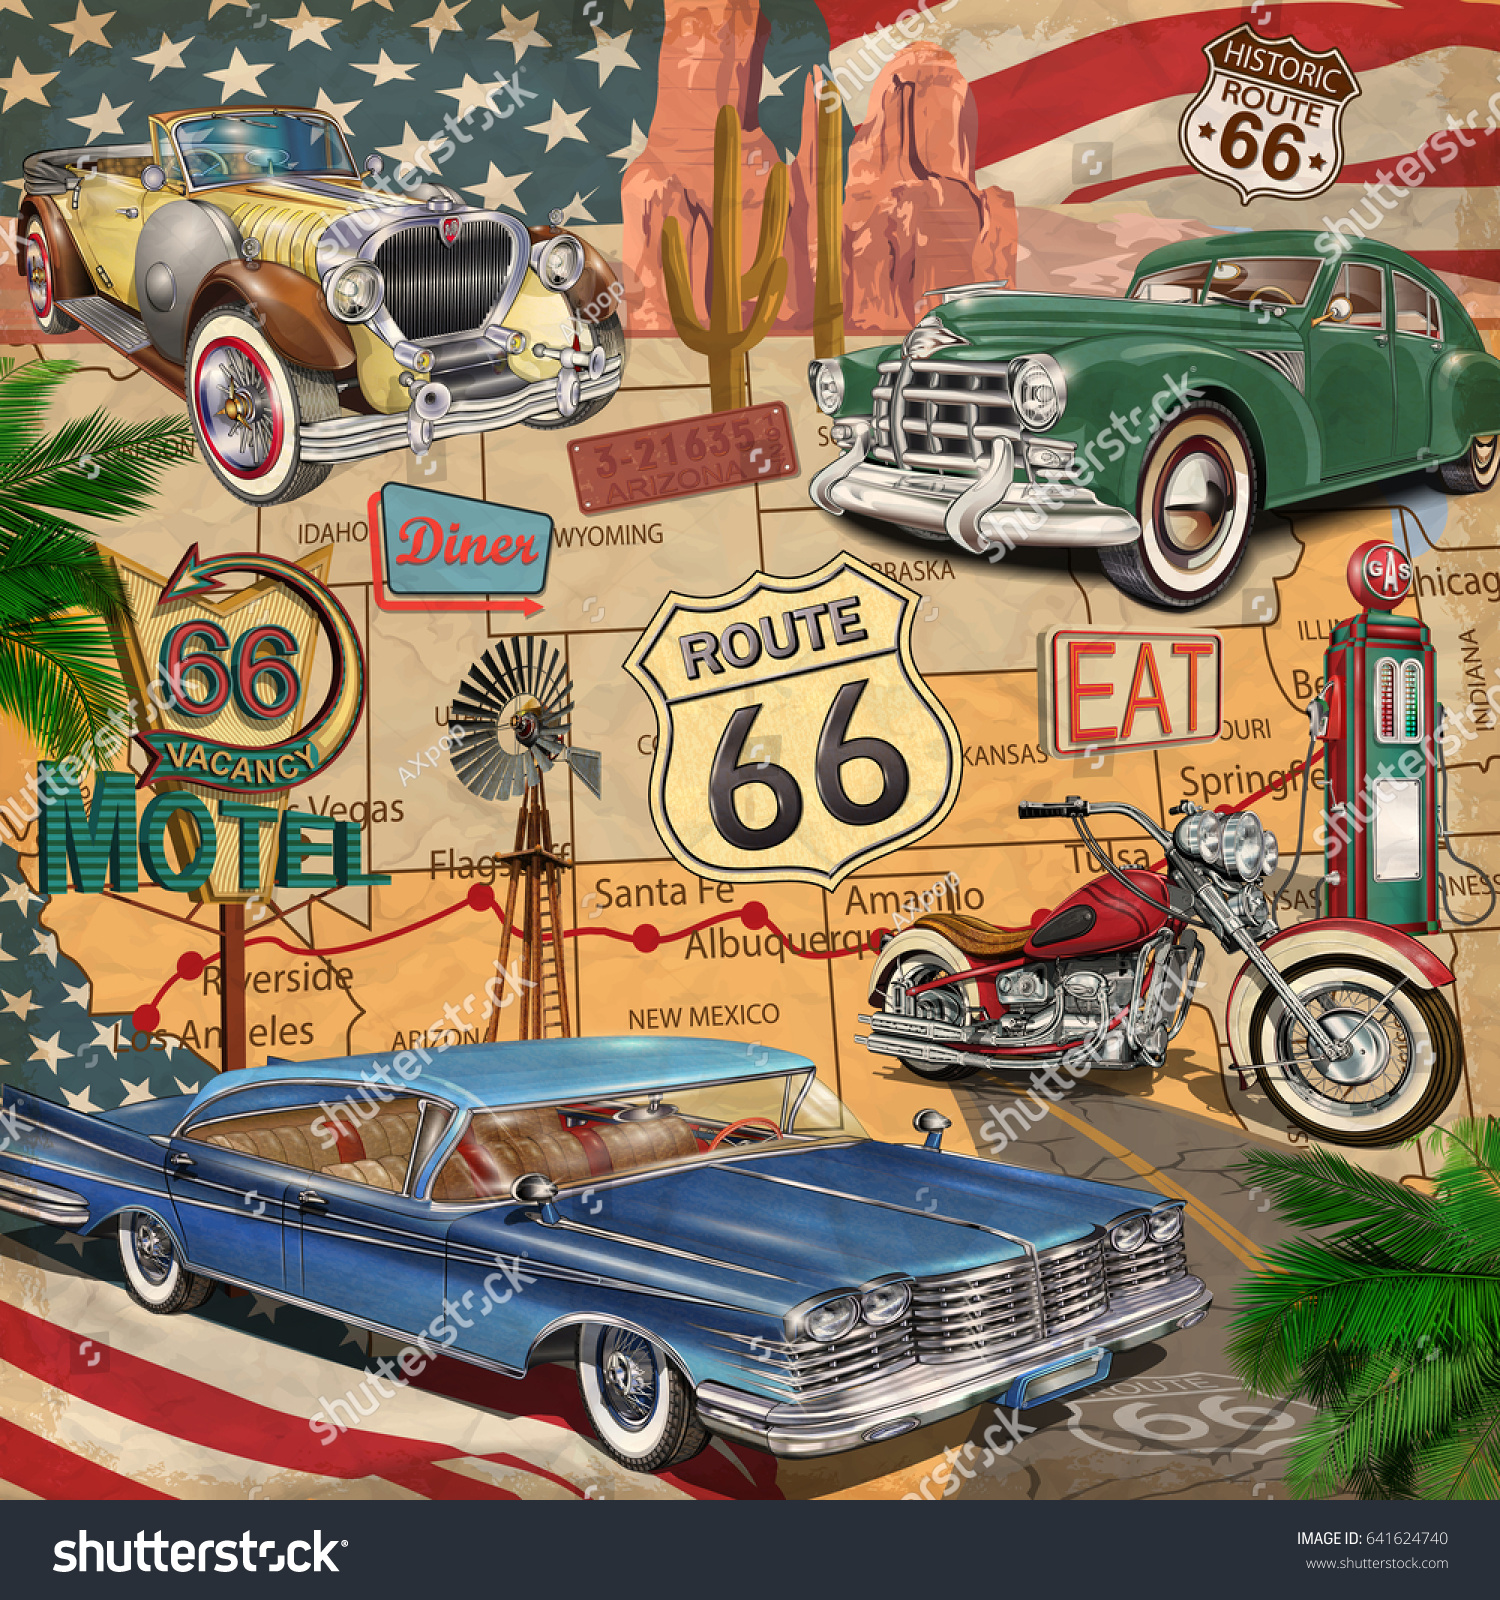 Motel Route 66 Vintage Poster Stock Vector (Royalty Free 